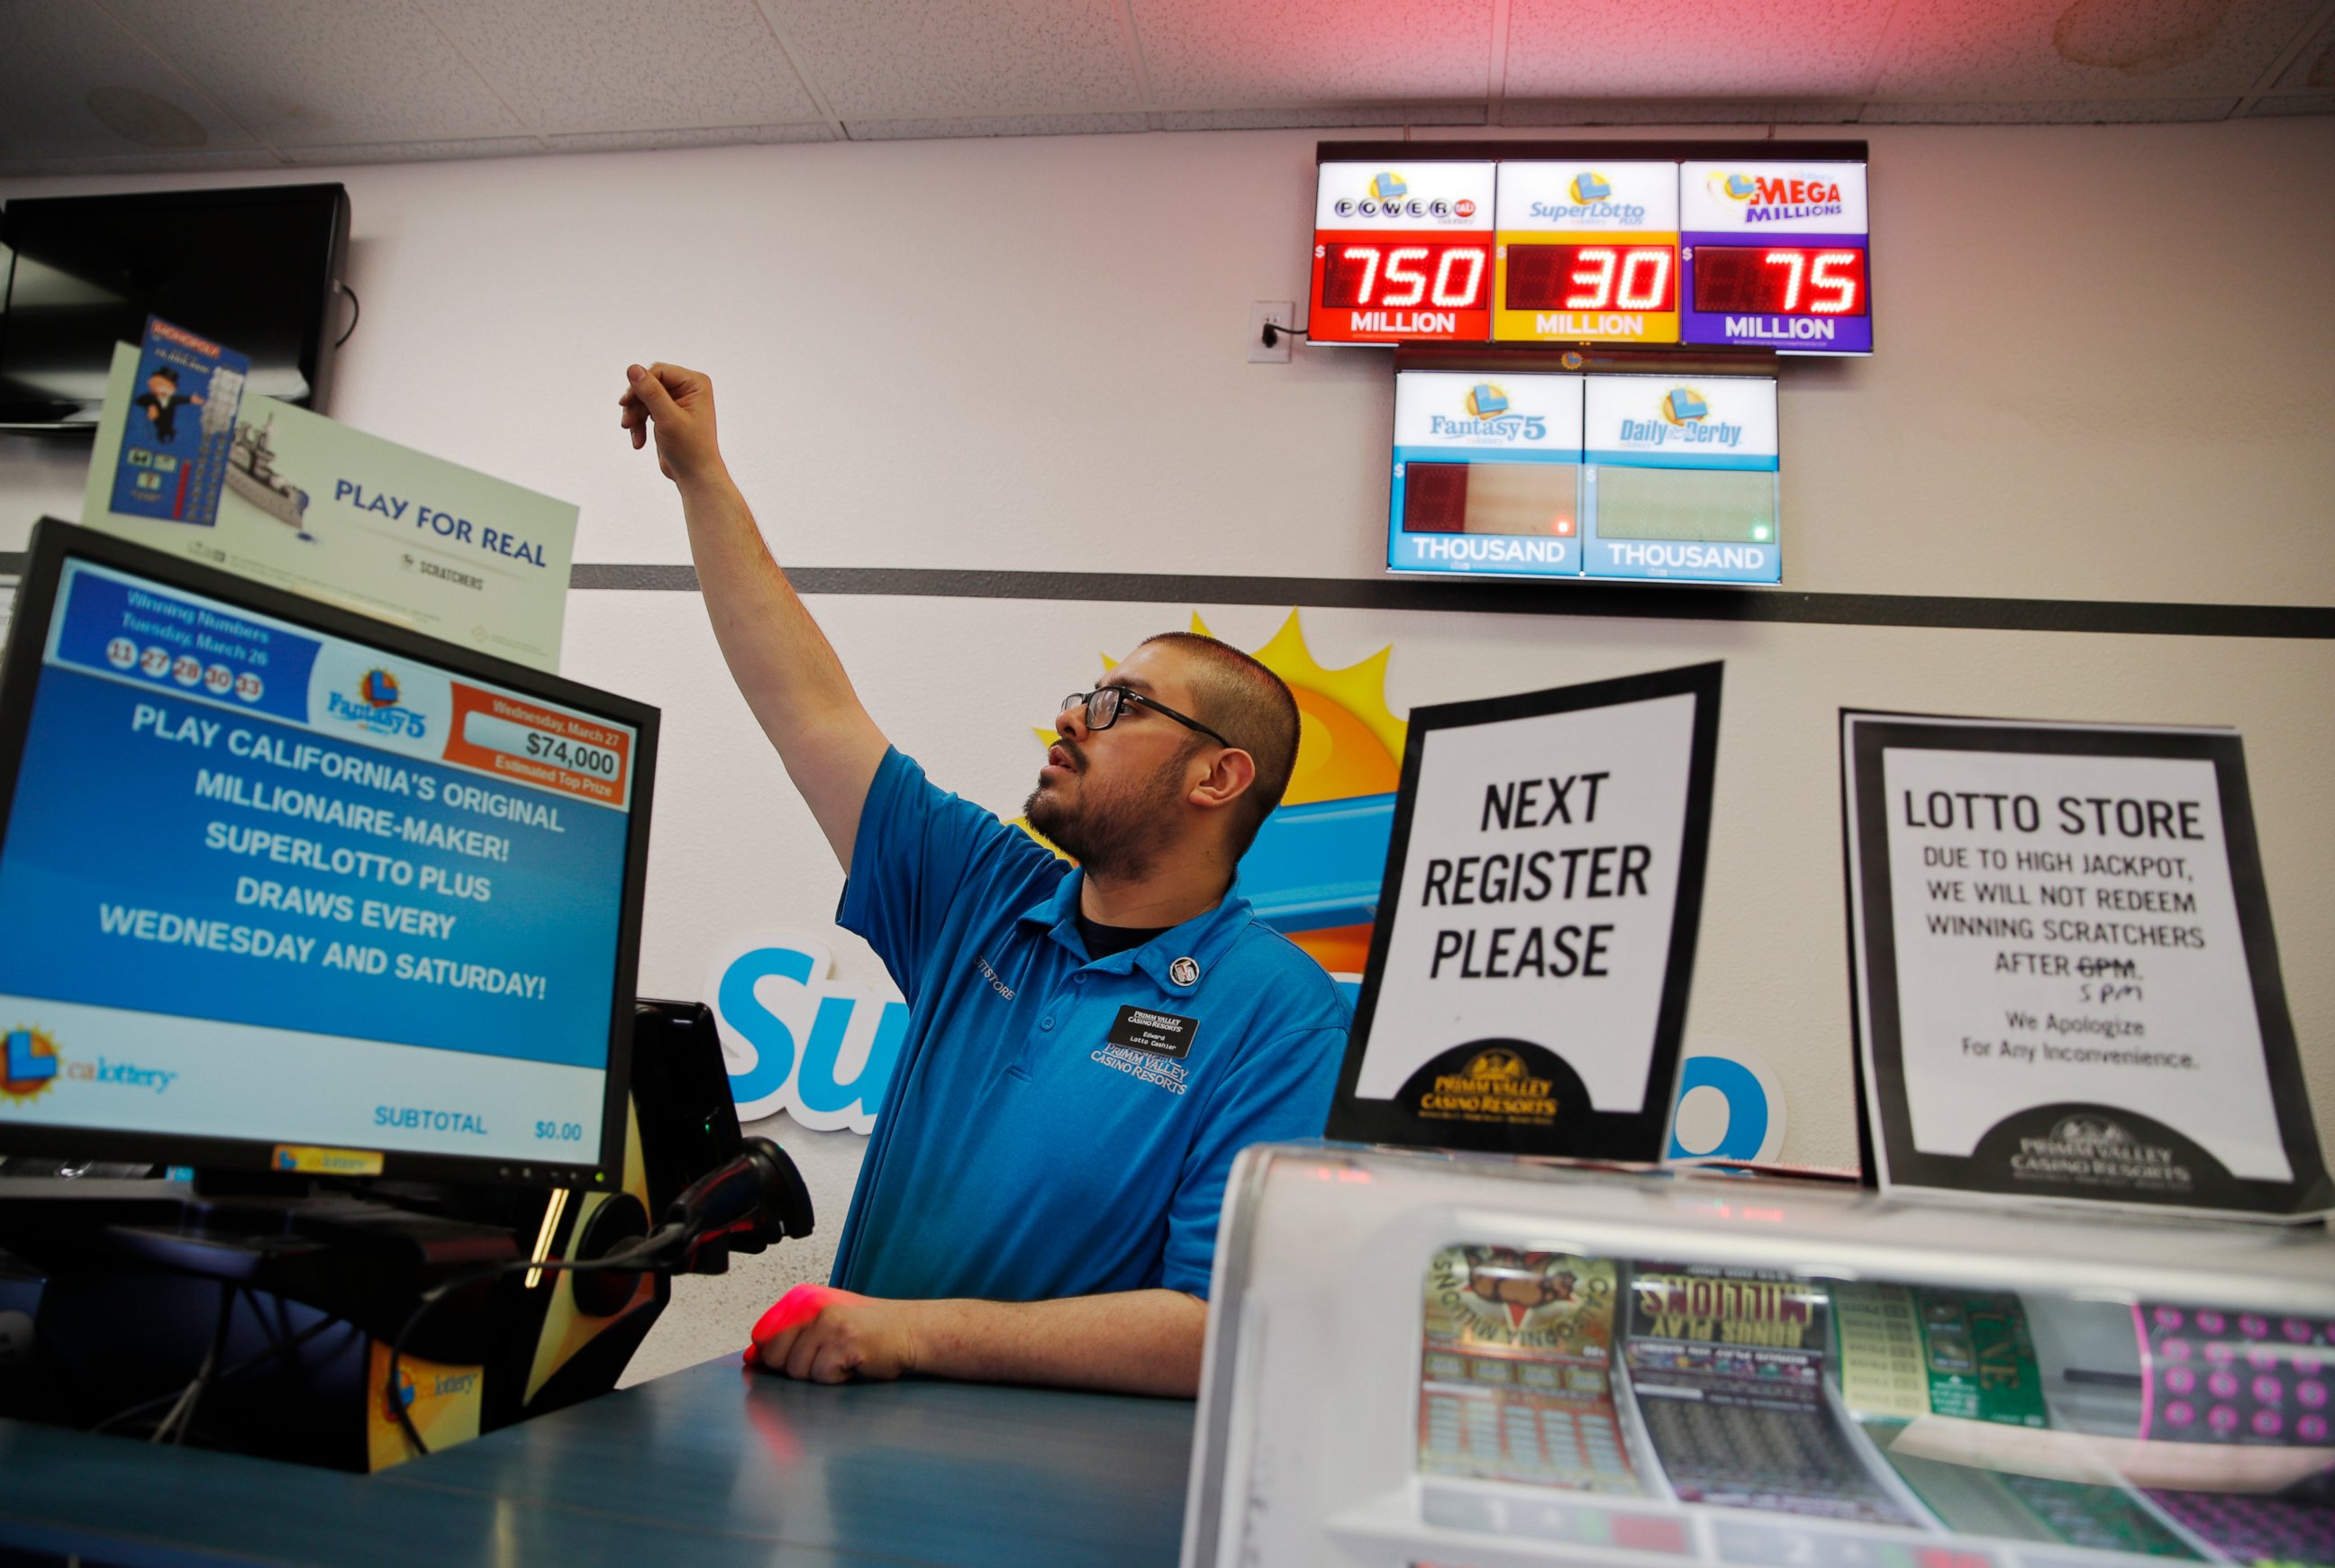 PHOTO: Cashier Edward Kelliher sells lottery tickets at the Lotto Store at Primm just inside the California border Wednesday, March 27, 2019, near Primm, Nev. The Powerball jackpot soared to a massive $750 million Wednesday.